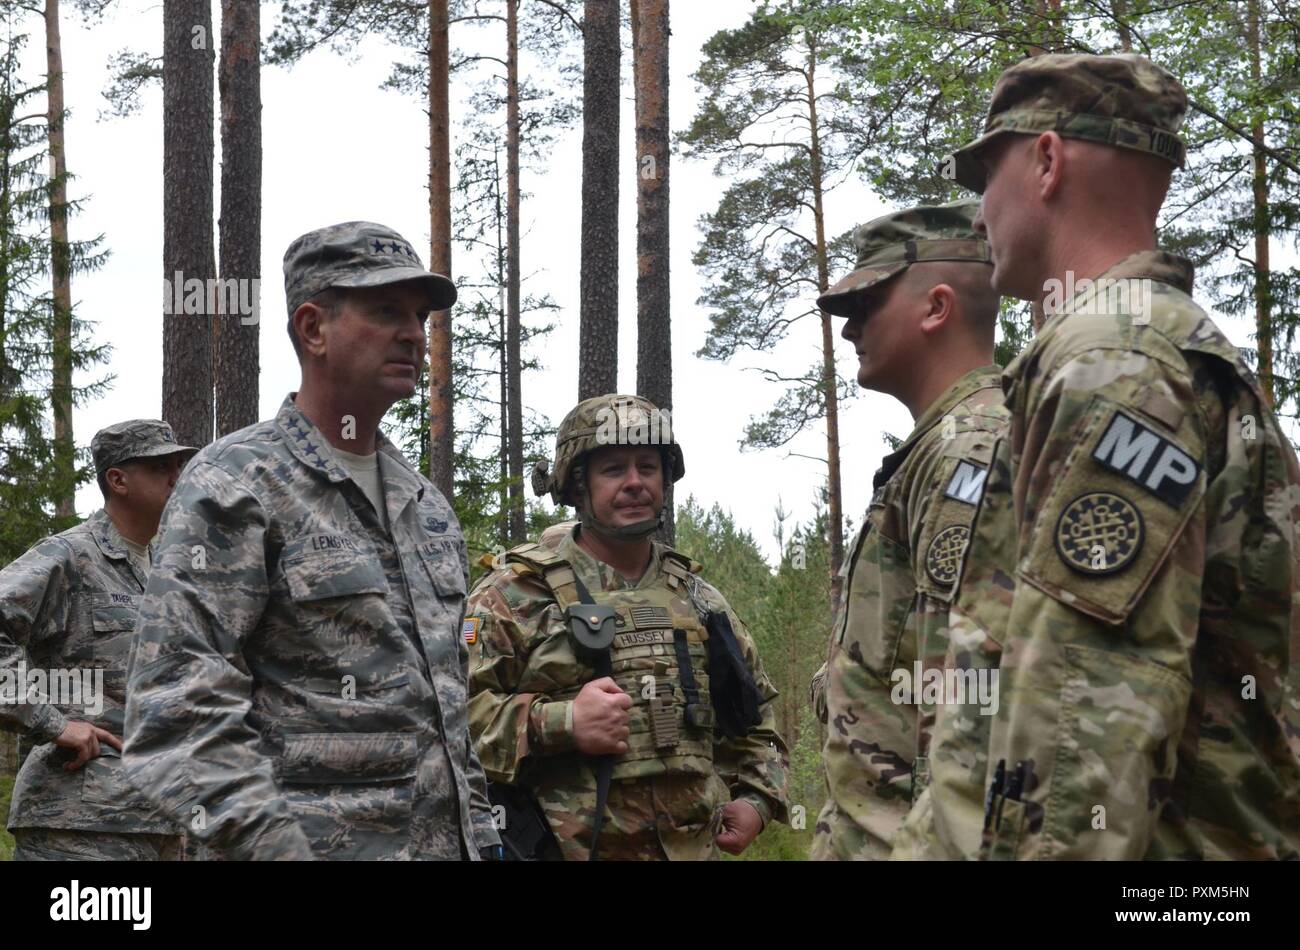 ADAZI MILITARY BASE, Latvia — U.S. Air Force Gen. Joseph L. Lengyel, Chief of the National Guard Bureau and member of the Joint Chiefs of Staff, meets with members of the 1775th Military Police Company, 210th Military Police Battalion, 177th Military Police Brigade, Michigan Army National Guard; and 3rd Battalion, 157th Field Artillery Regiment, 169th Fires Brigade, Colorado Army National Guard.  The units are in the Baltics for Exercise Saber Strike, a U.S. Army Europe led exercise in the Baltic region. The exercise tests the capability of multiple nations to act against a threat. Stock Photo